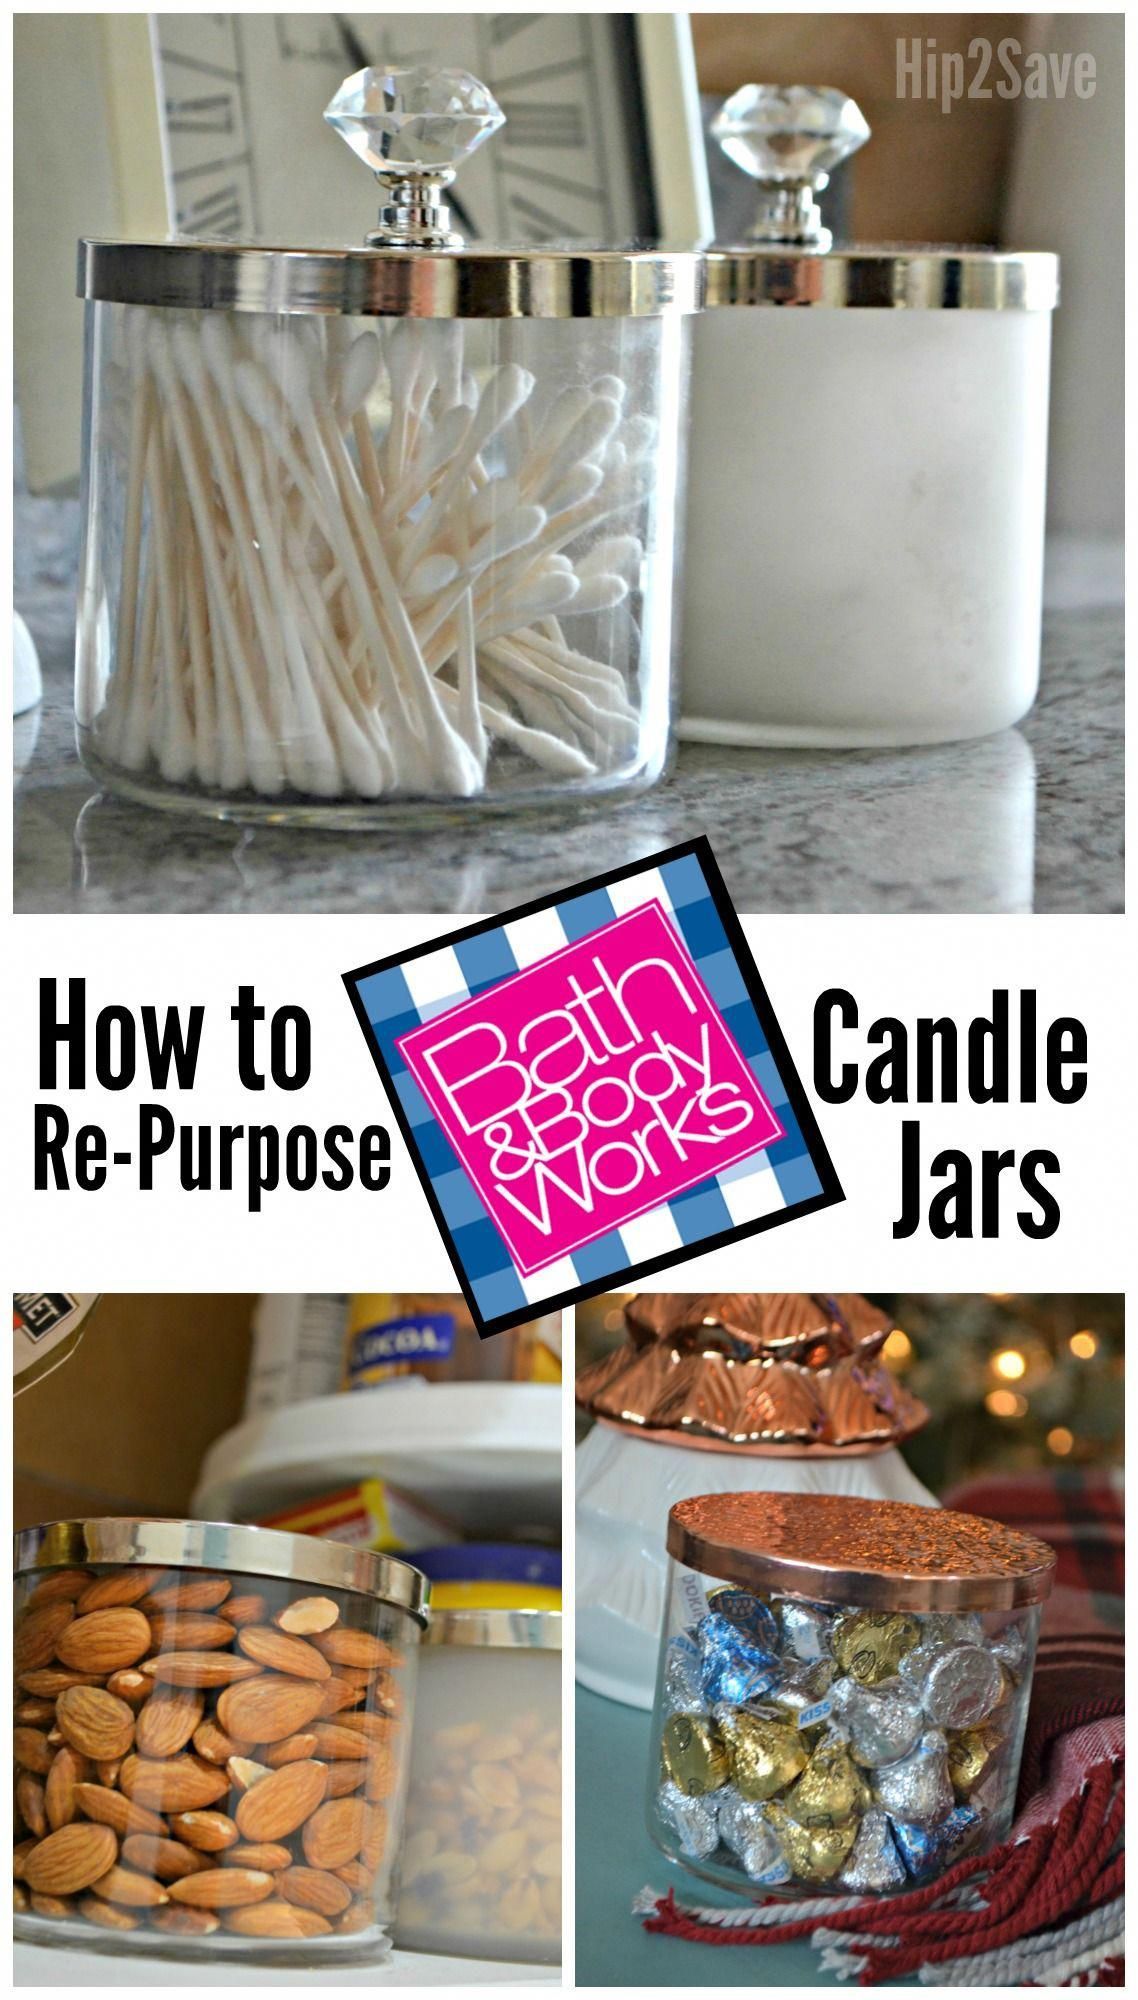 6 Easy Ways to Reuse Bath & Body Works Candle Jars at Home - 6 Easy Ways to Reuse Bath & Body Works Candle Jars at Home -   15 diy Candles bath and body works ideas